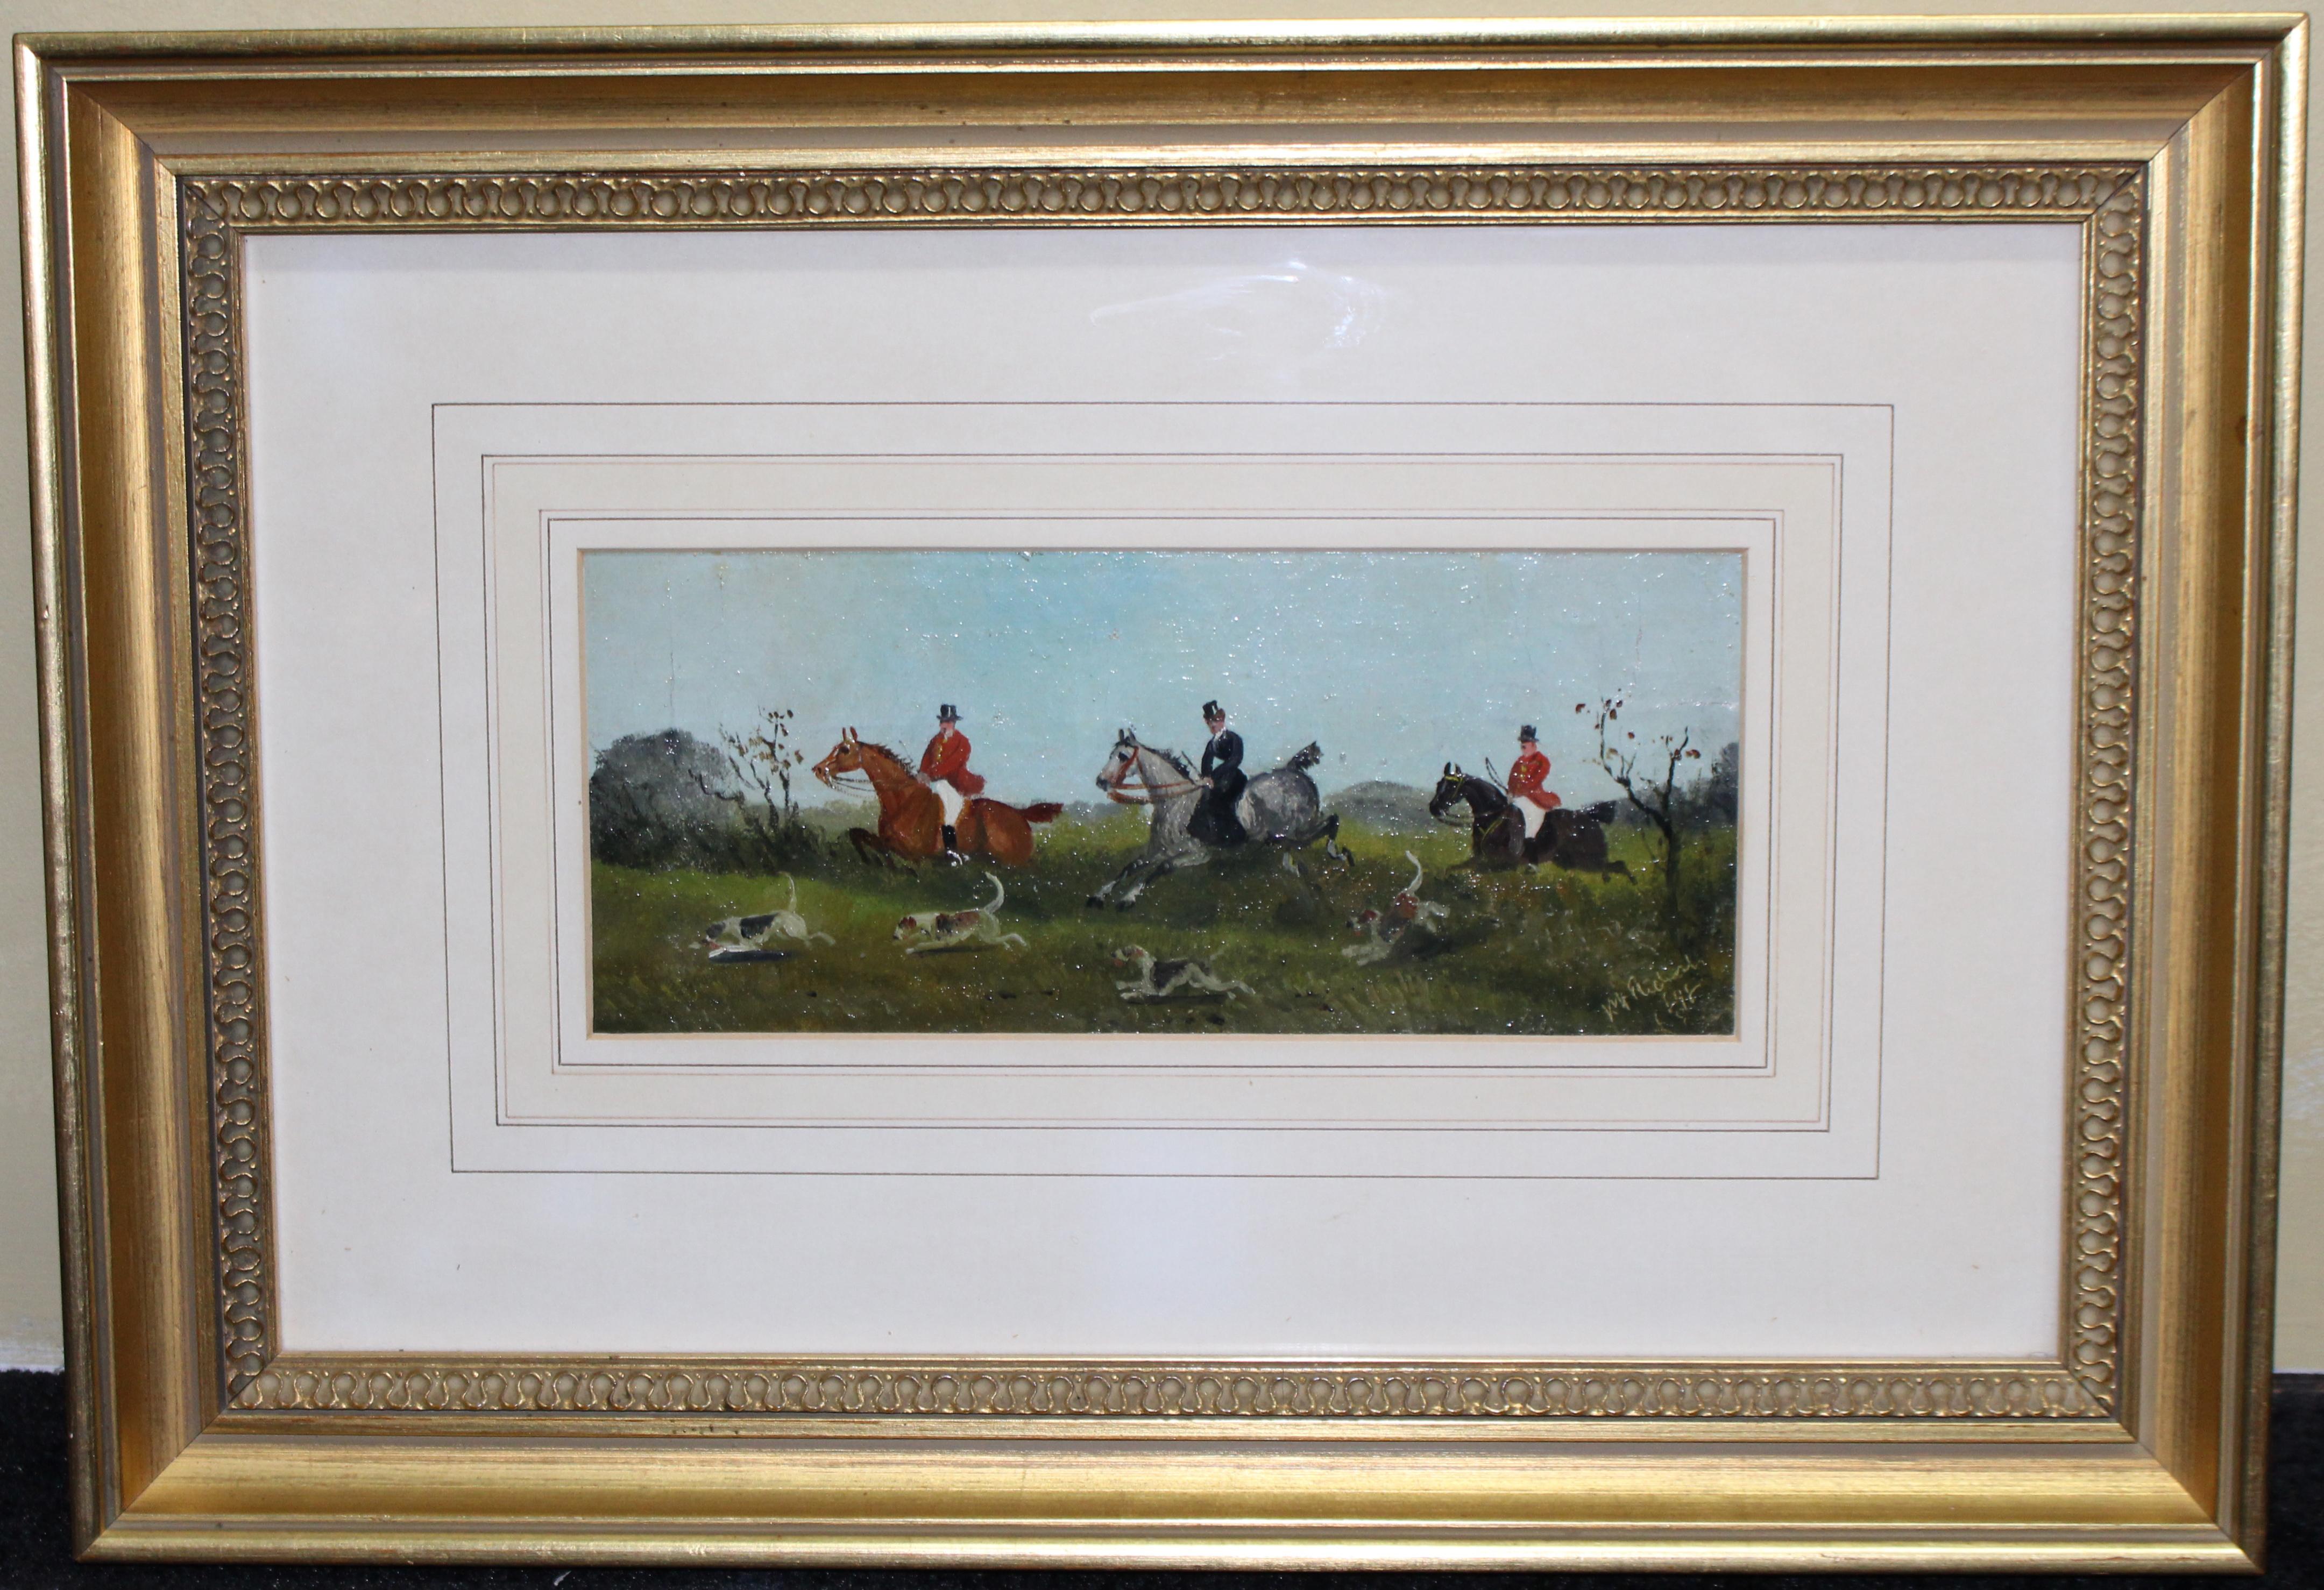 Period late 19th century
Medium oil on canvas mounted on board
Frame 46 x 32 cm / 18 x 12 1/2 in
Subject fox hunting
Signed to the bottom right of each painting
Frame mounted and set behind glass in gilt frame
Condition very good condition